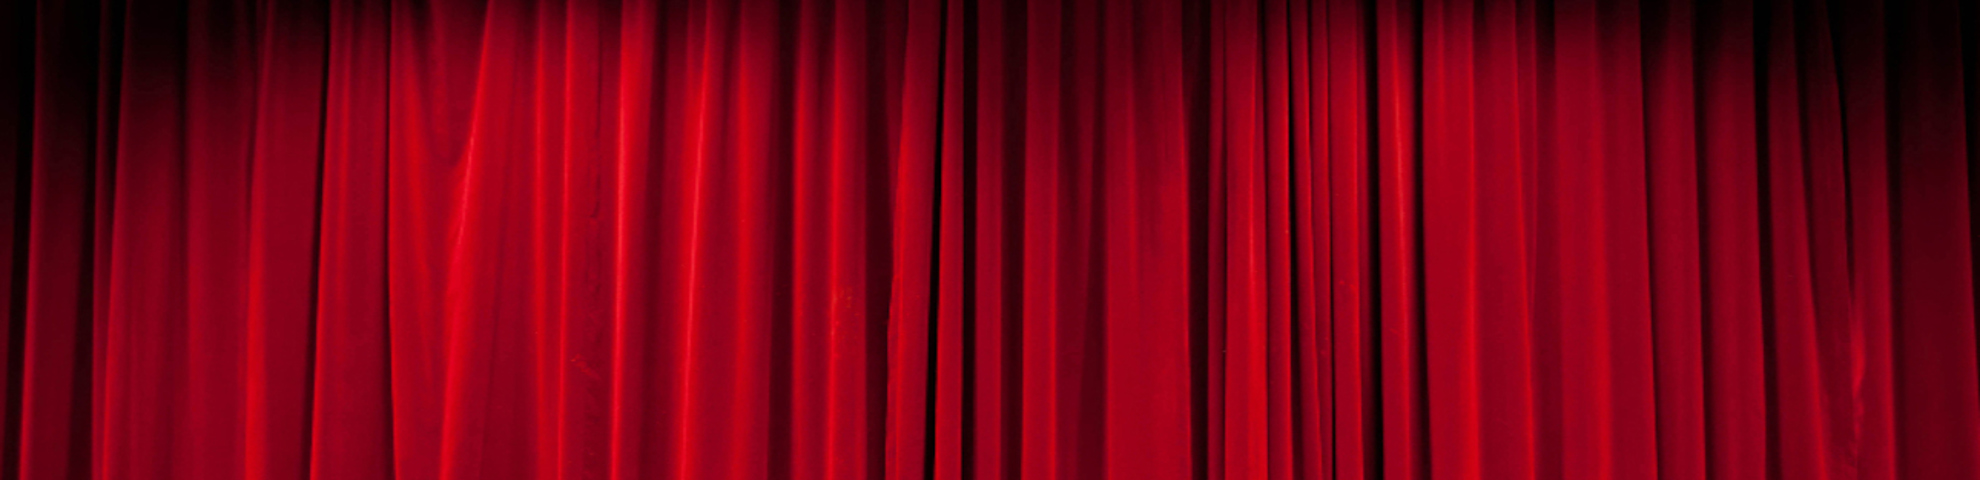 Red curtain on a theatre stage.